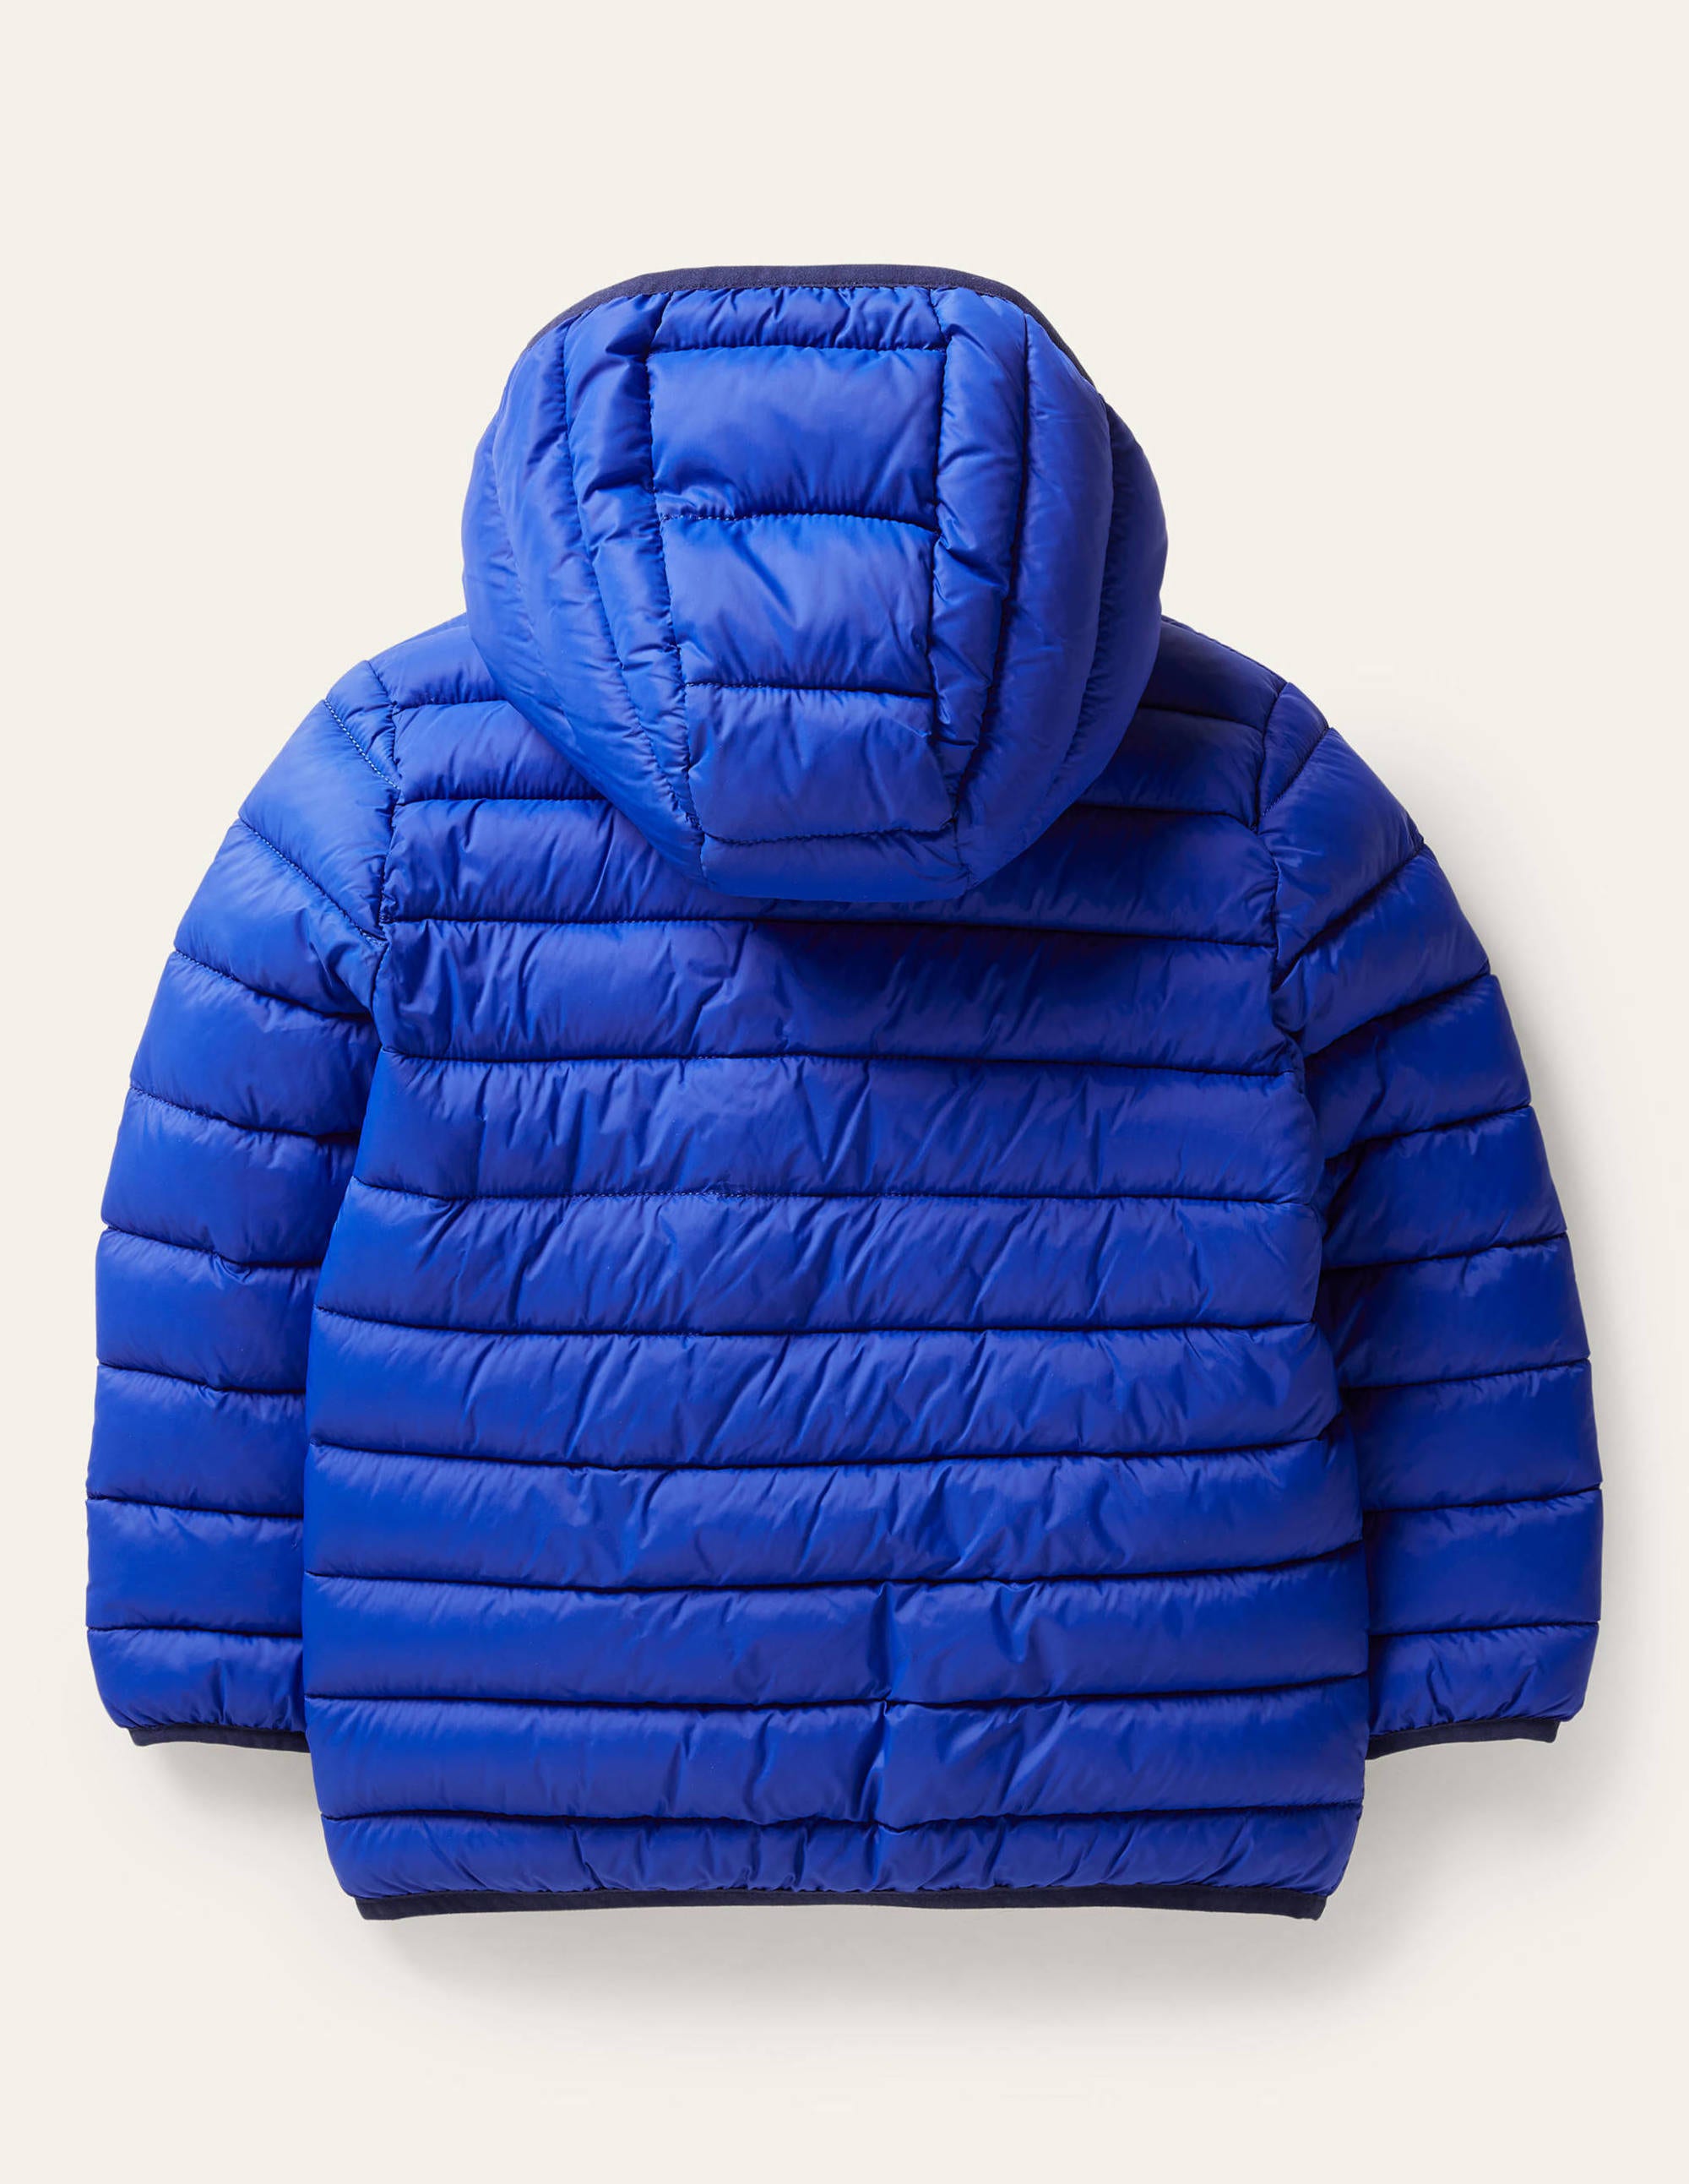 Cosy Pack-away Padded Jacket - Brilliant Blue | Boden UK